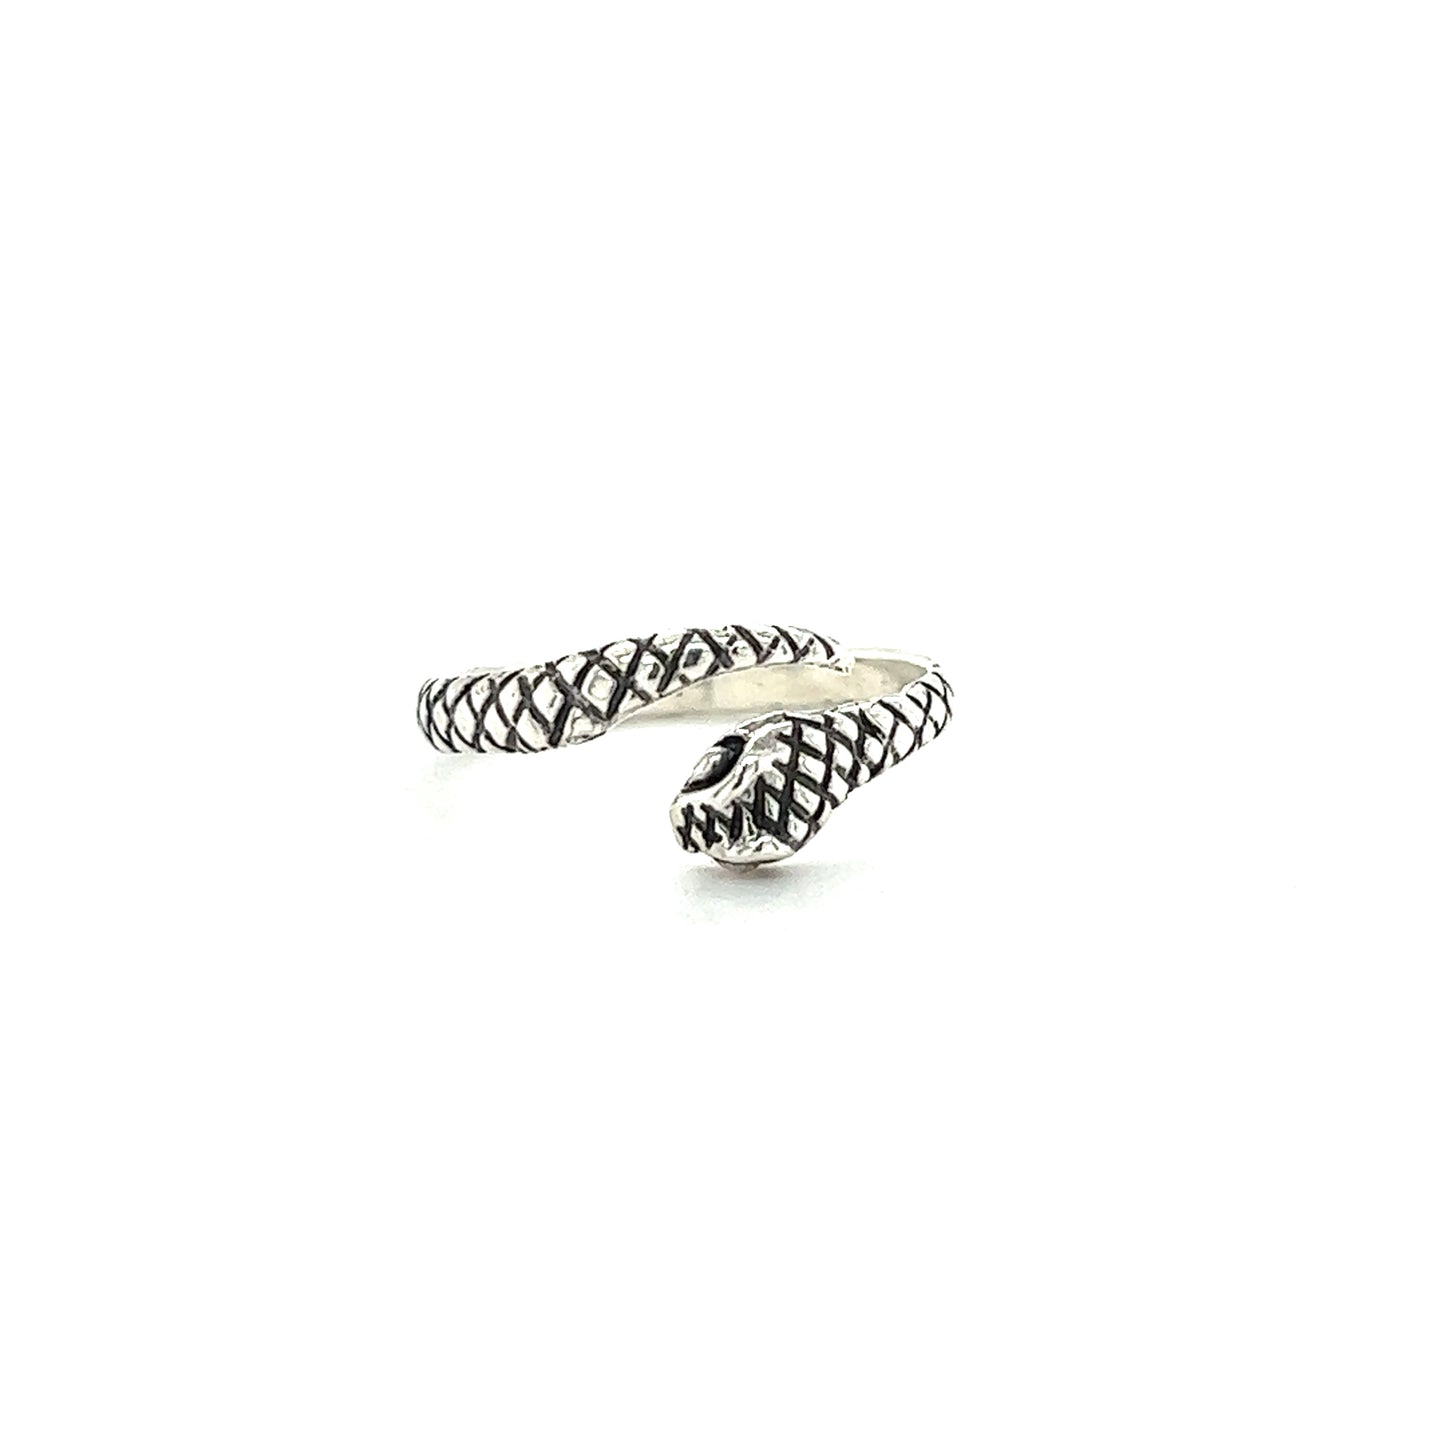 
                  
                    An adjustable silver Adjustable Snake Ring With Large Eyes with detailed scale patterns, photographed on a white background.
                  
                